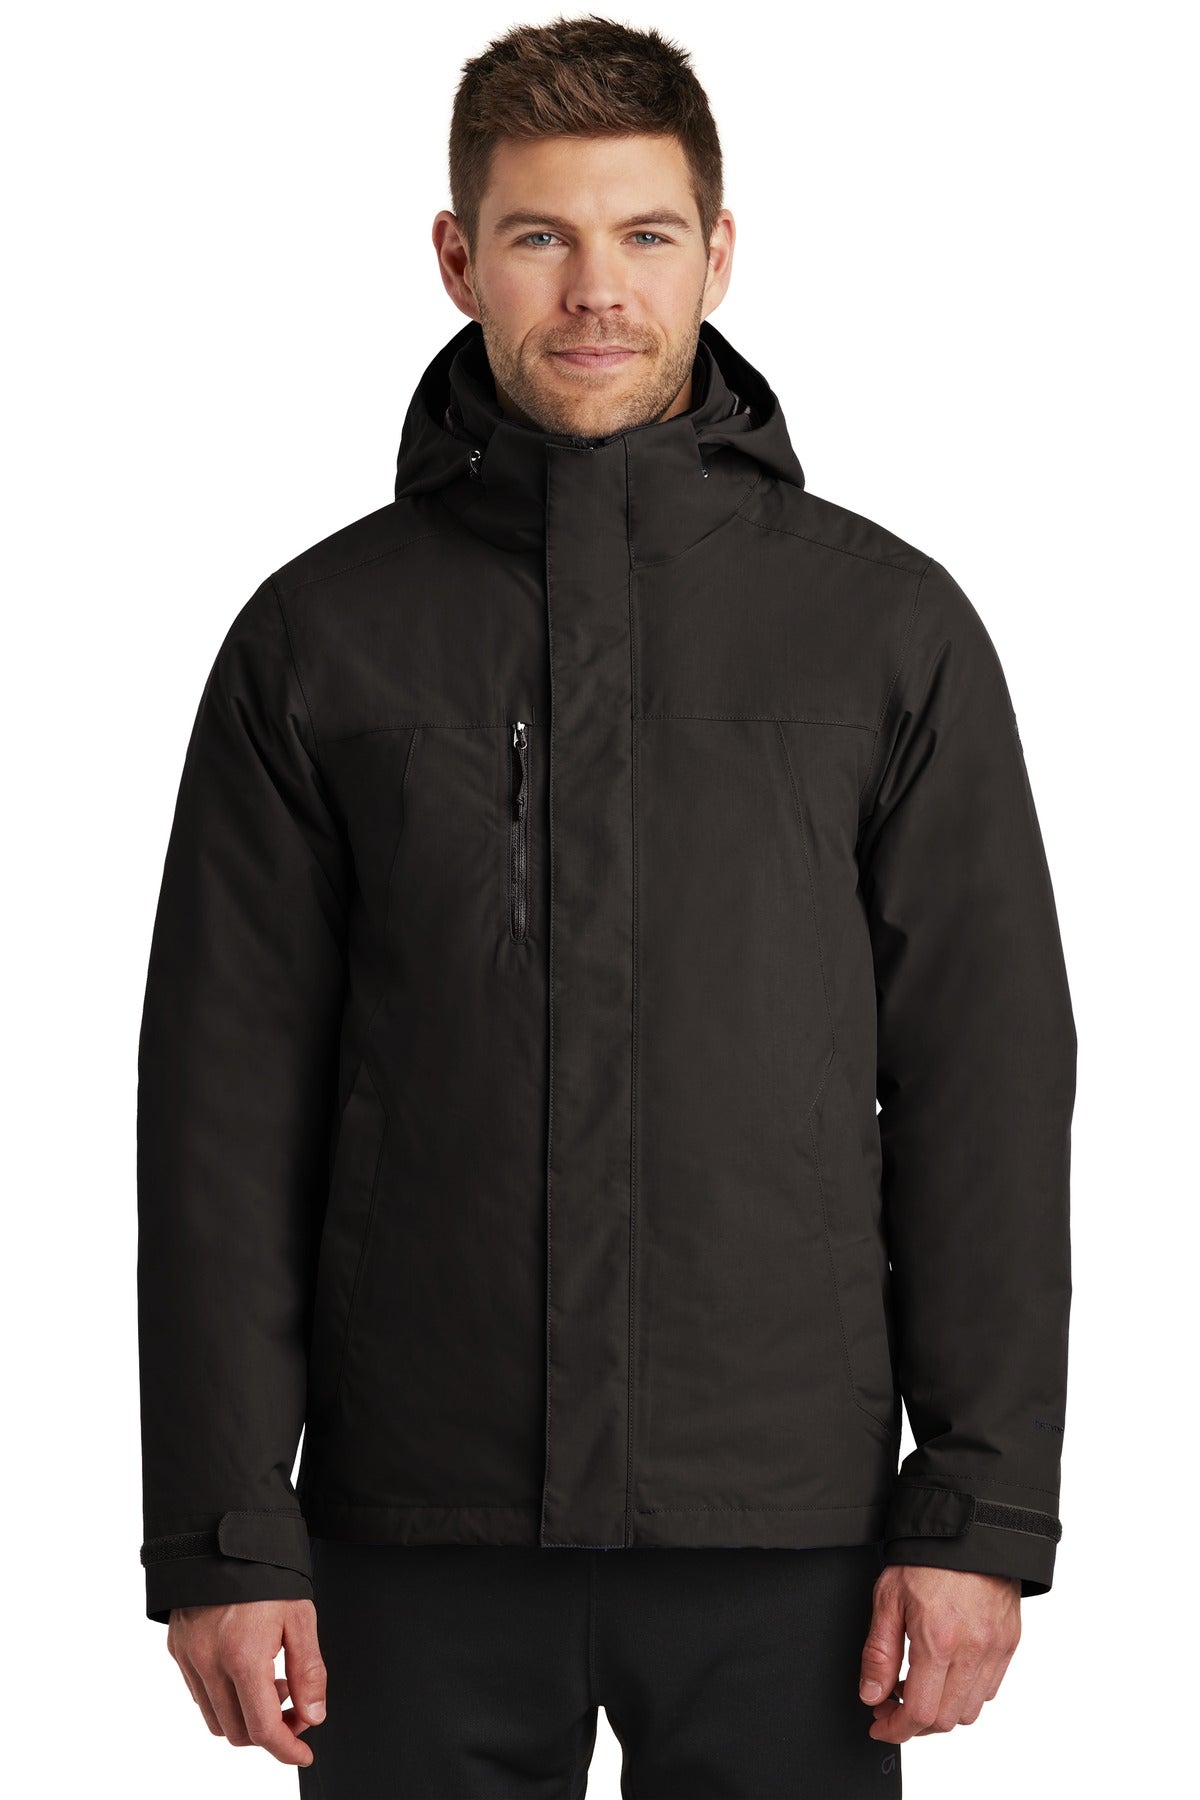 The North Face ® Traverse Triclimate ® 3-in-1 Jacket. NF0A3VHR - DFW Impression